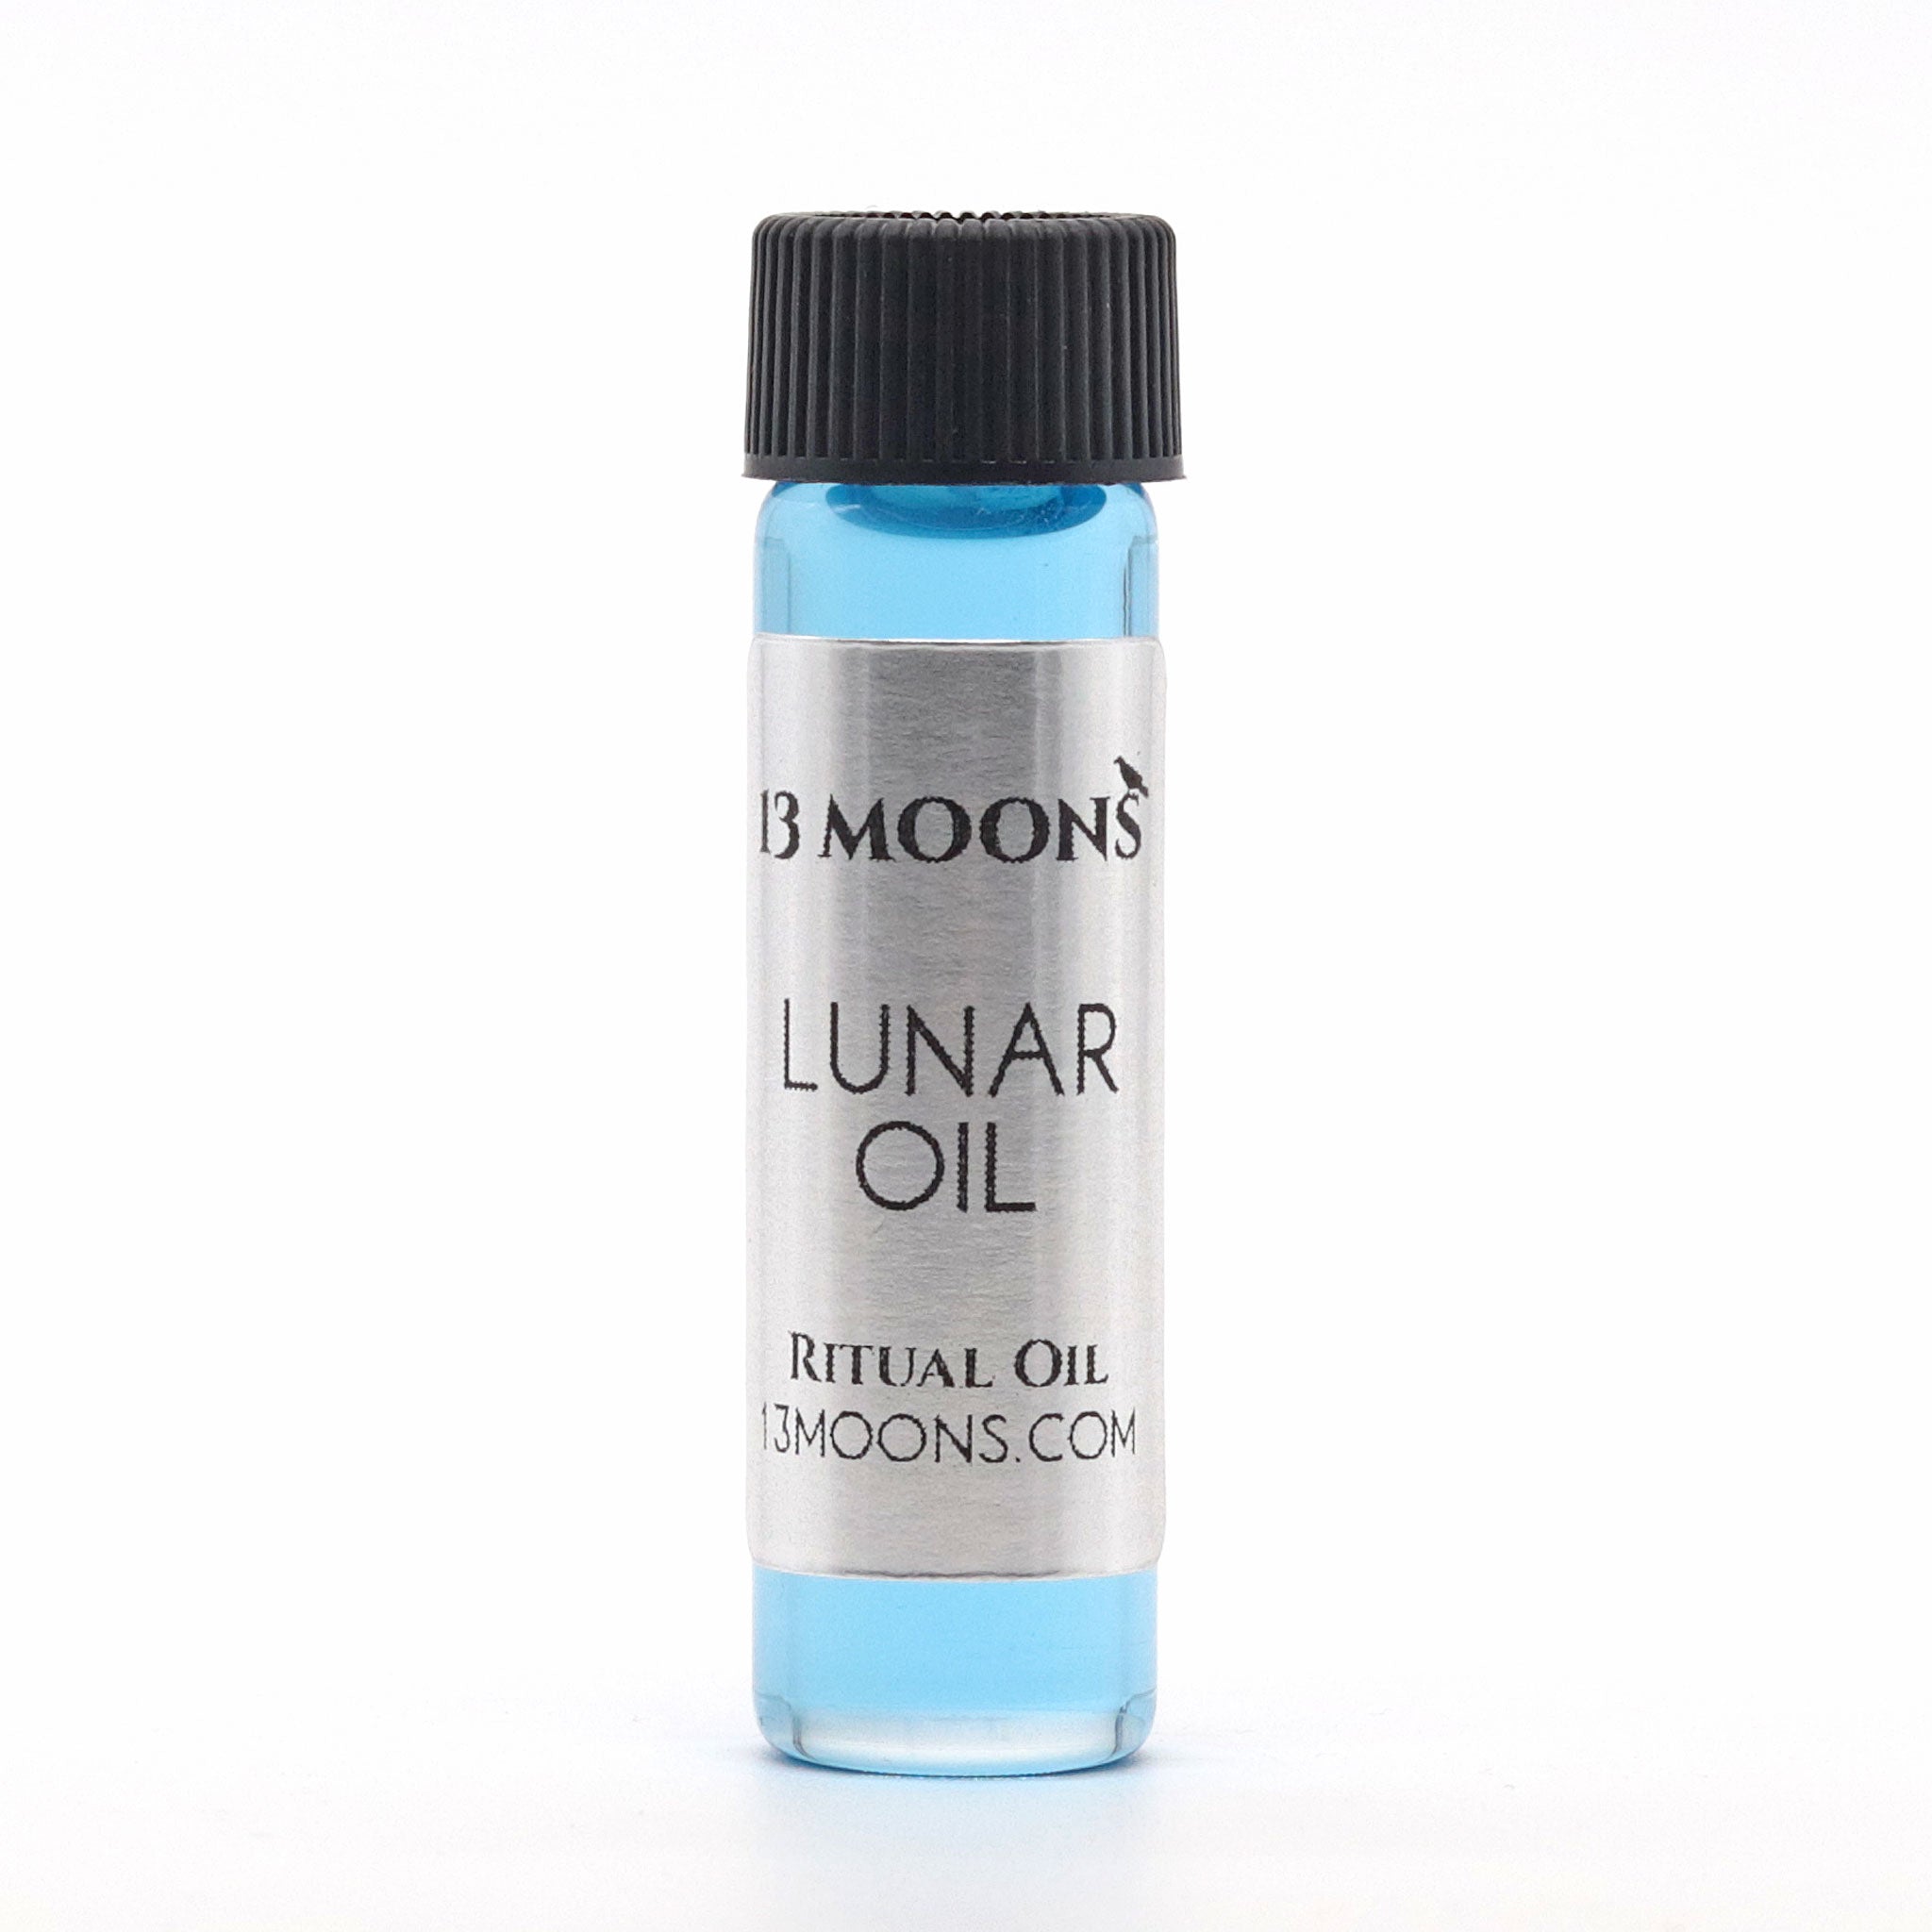 Lunar Oil by 13 Moons - 13 Moons